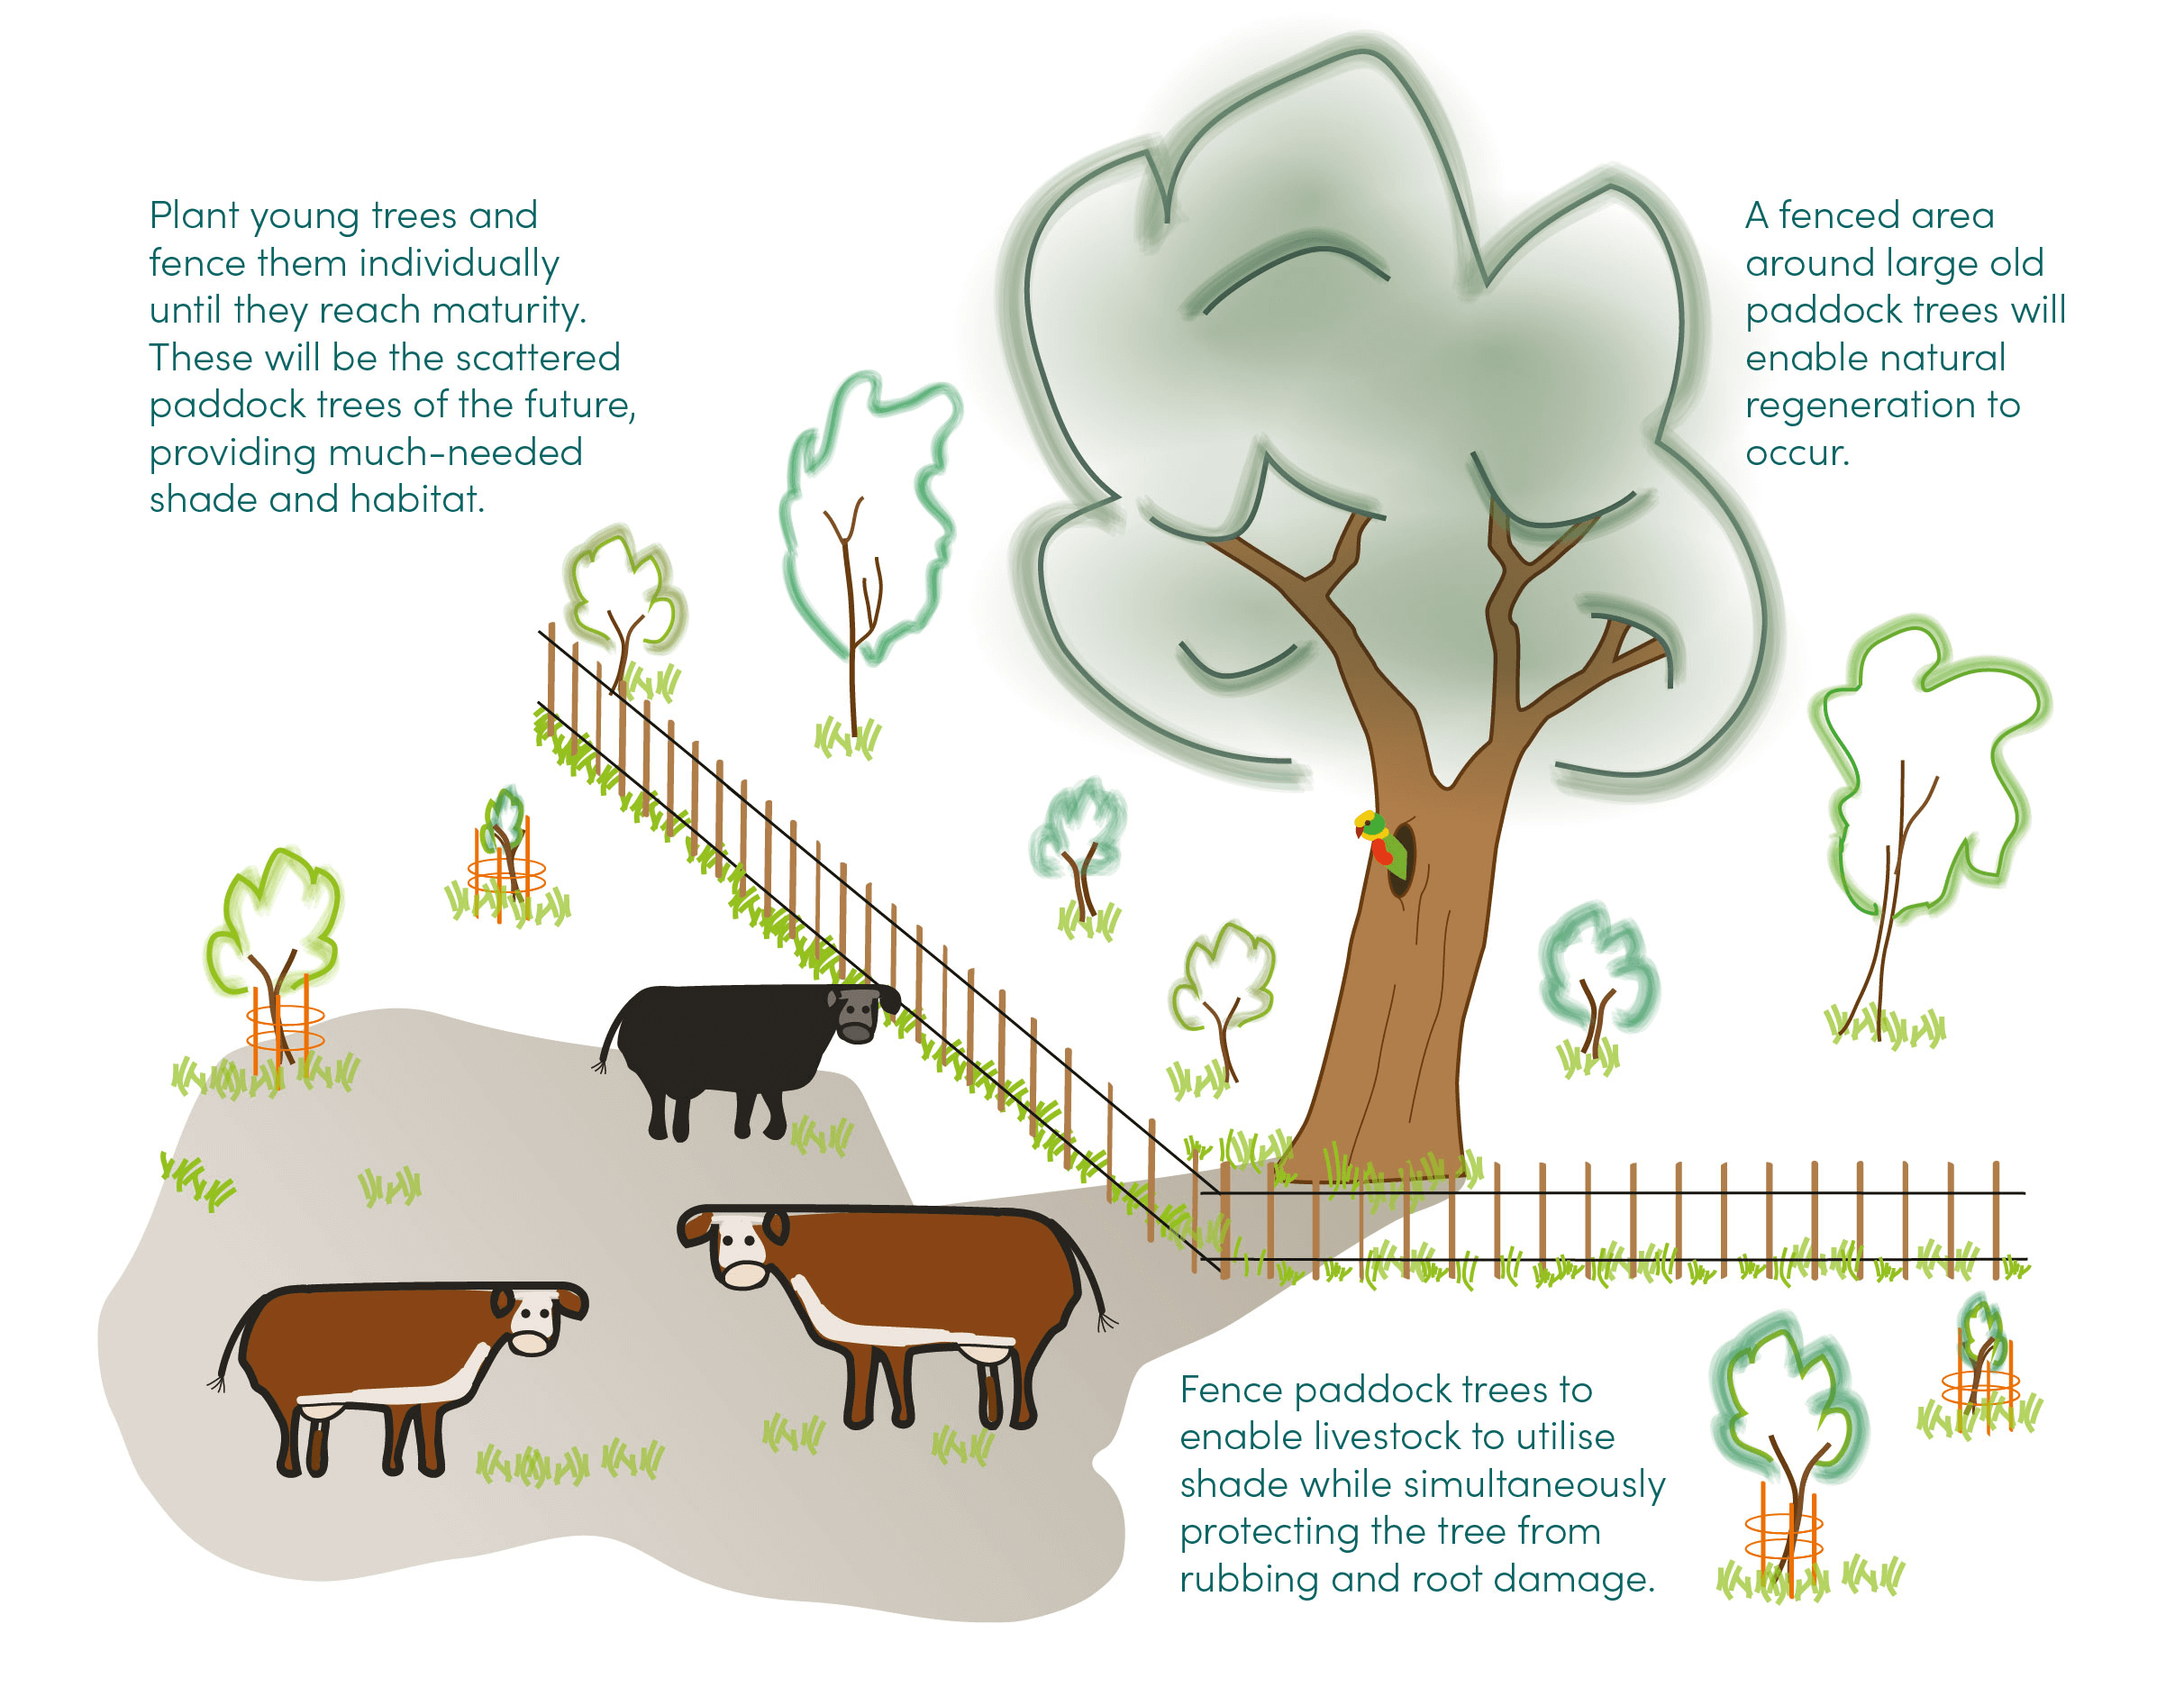 Protect and restore paddock trees – ANU Sustainable Farms